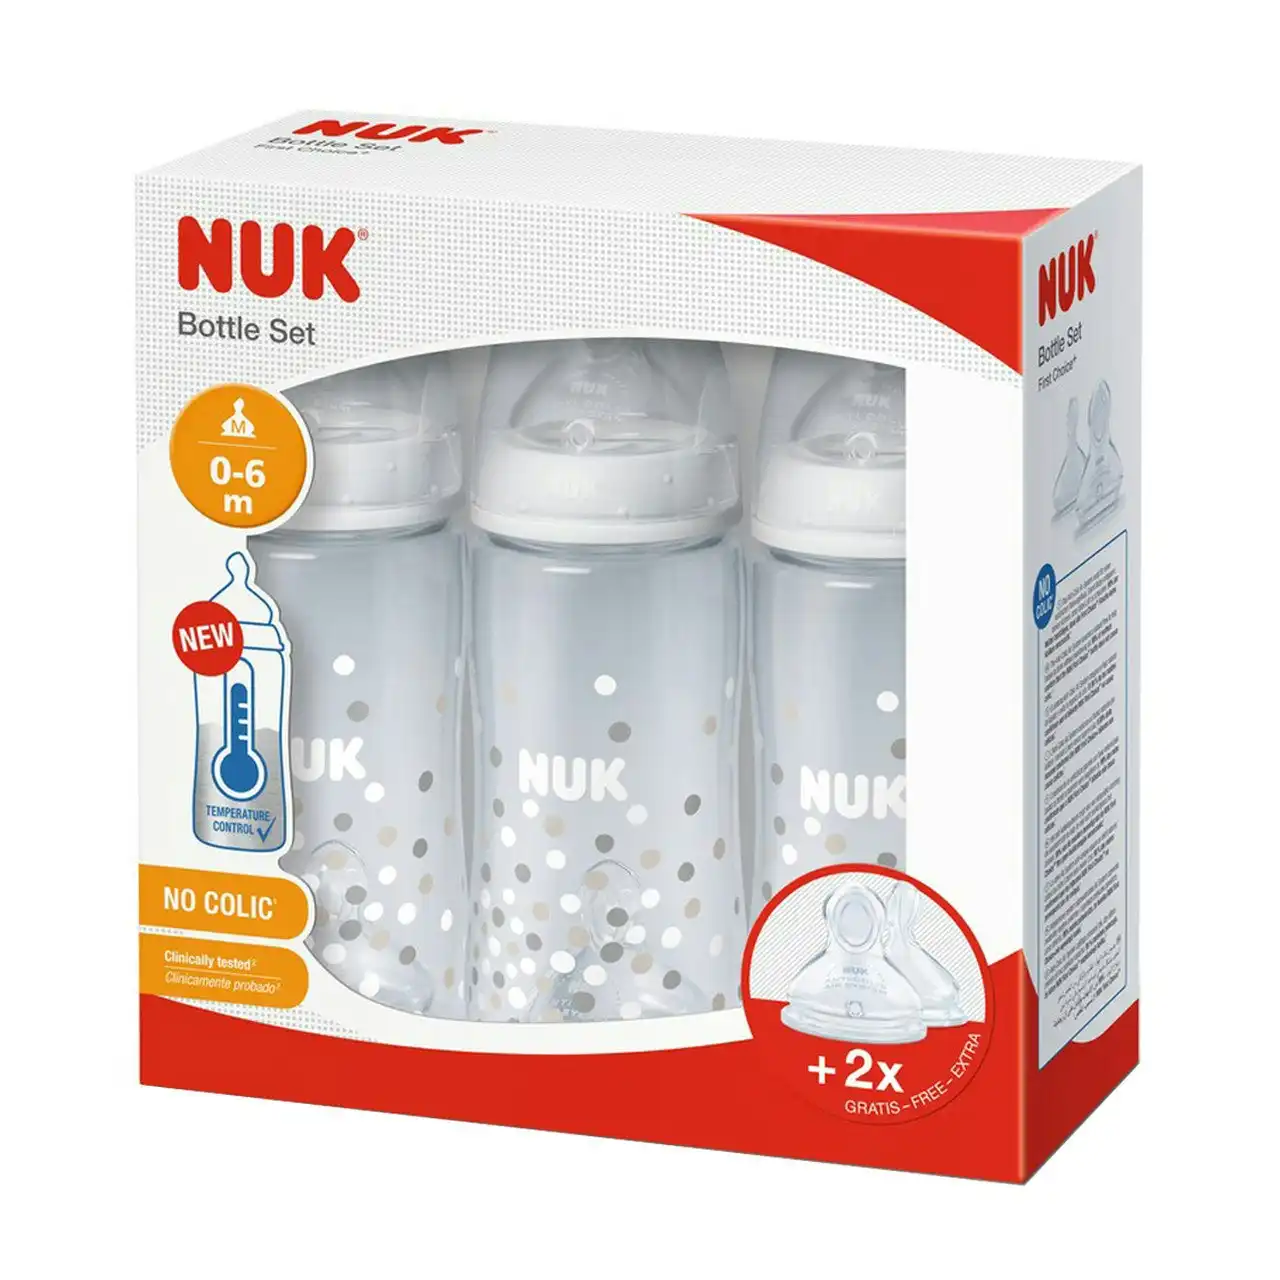 NUK First Choice+ Baby Bottle Set 0-6m 300ml, Includes 3 x Anti-Colic Bottles, 2 x Extra Teats, 5 Pack - Safari